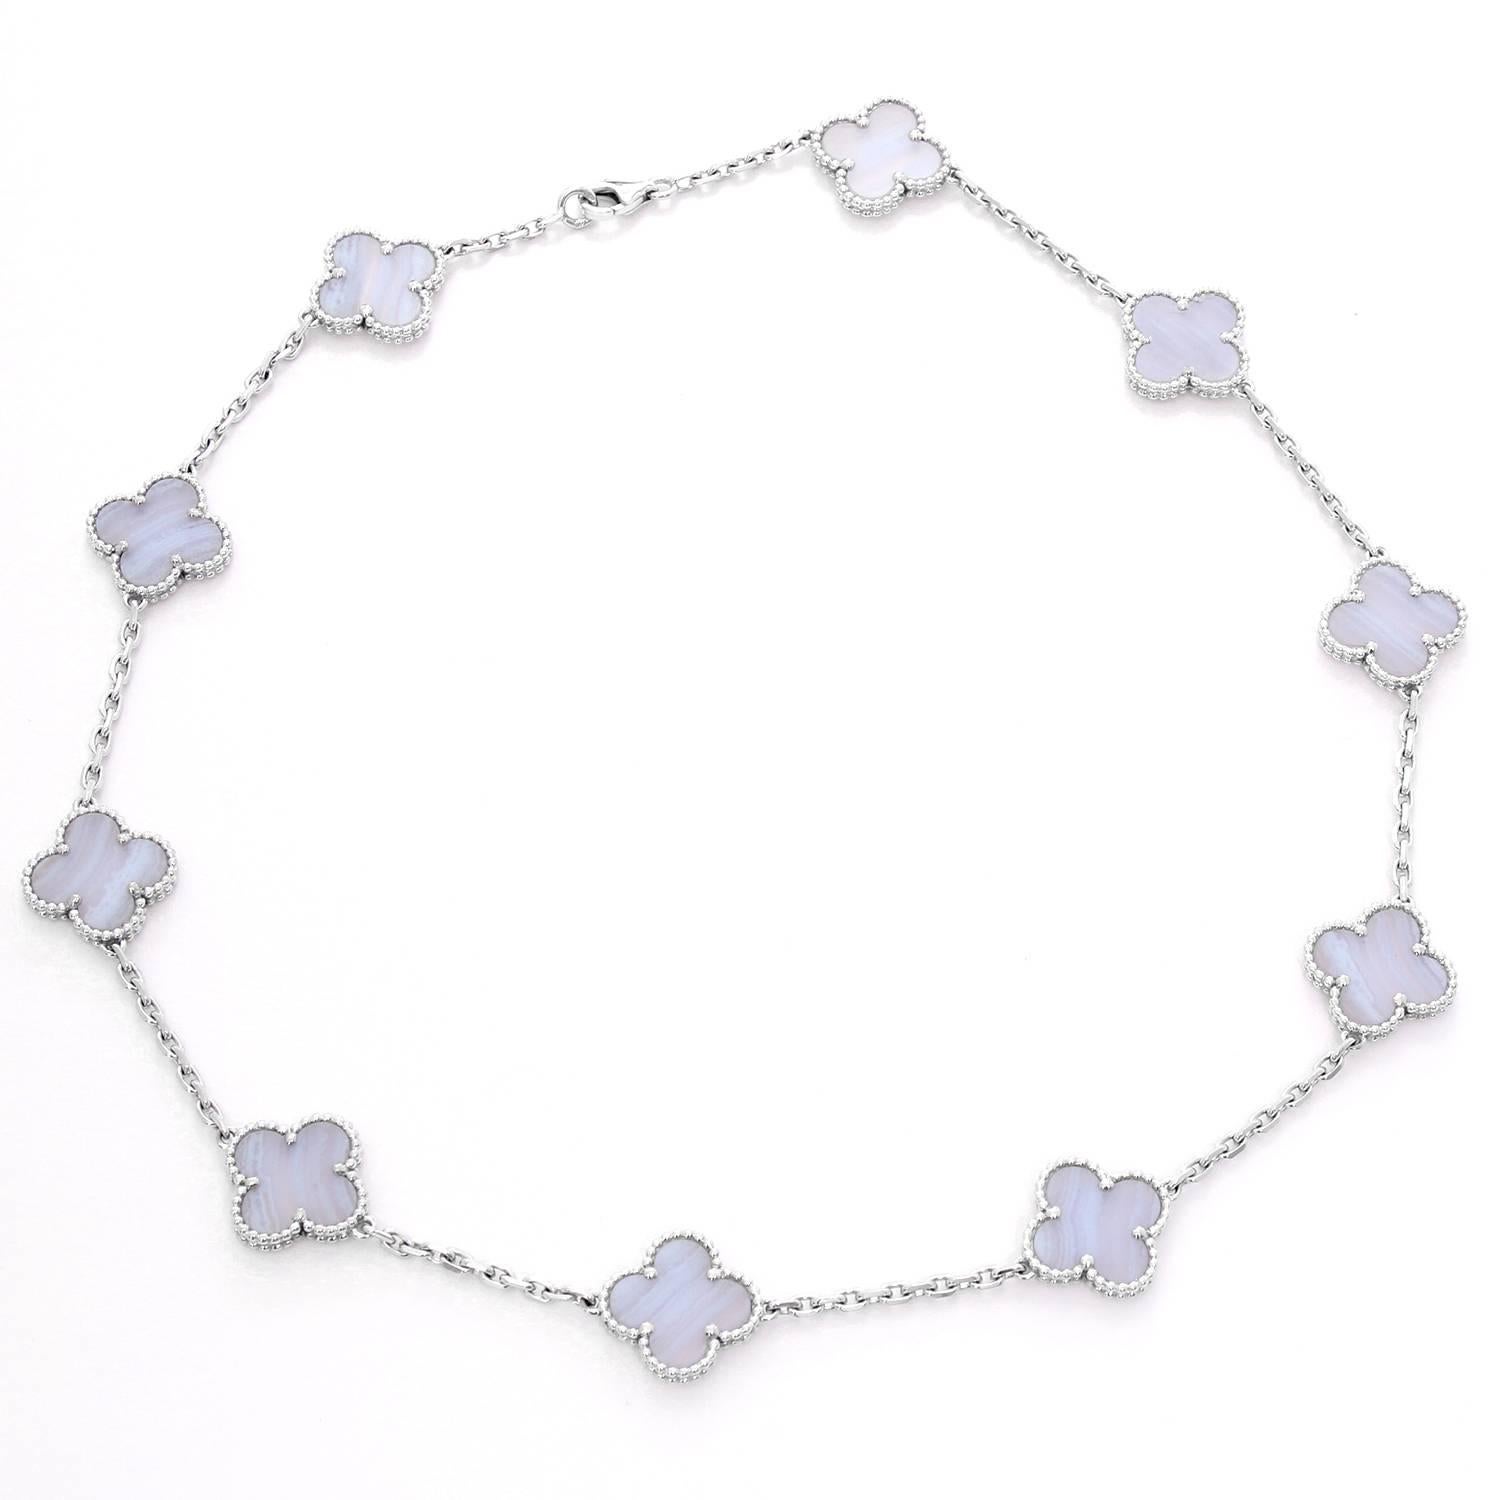 Van Cleef & Arpels Vintage Alhambra 10 Motifs - Beautiful Vintage Alhambra Van Cleef & Arpels Necklace. 10 Motifs set in White gold. Made of Chalcedony. Total weight 22.4 grams. Total length 16 inches . 